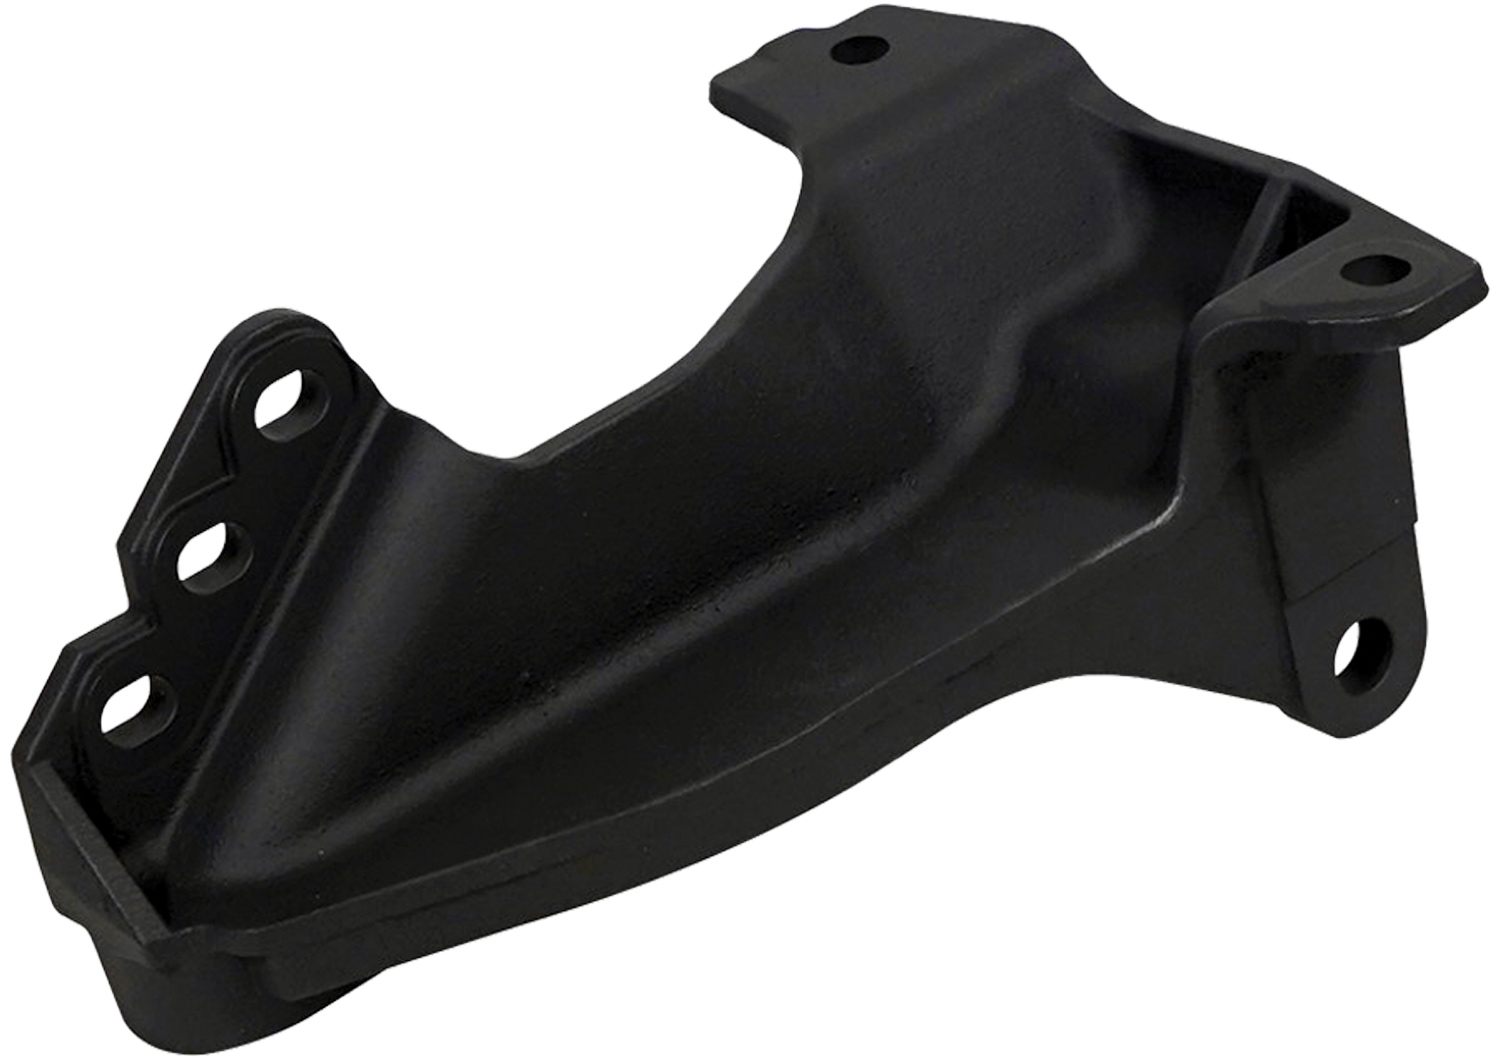 BD Diesel's new track bar bracket for 2008-2021 F250 and F350s